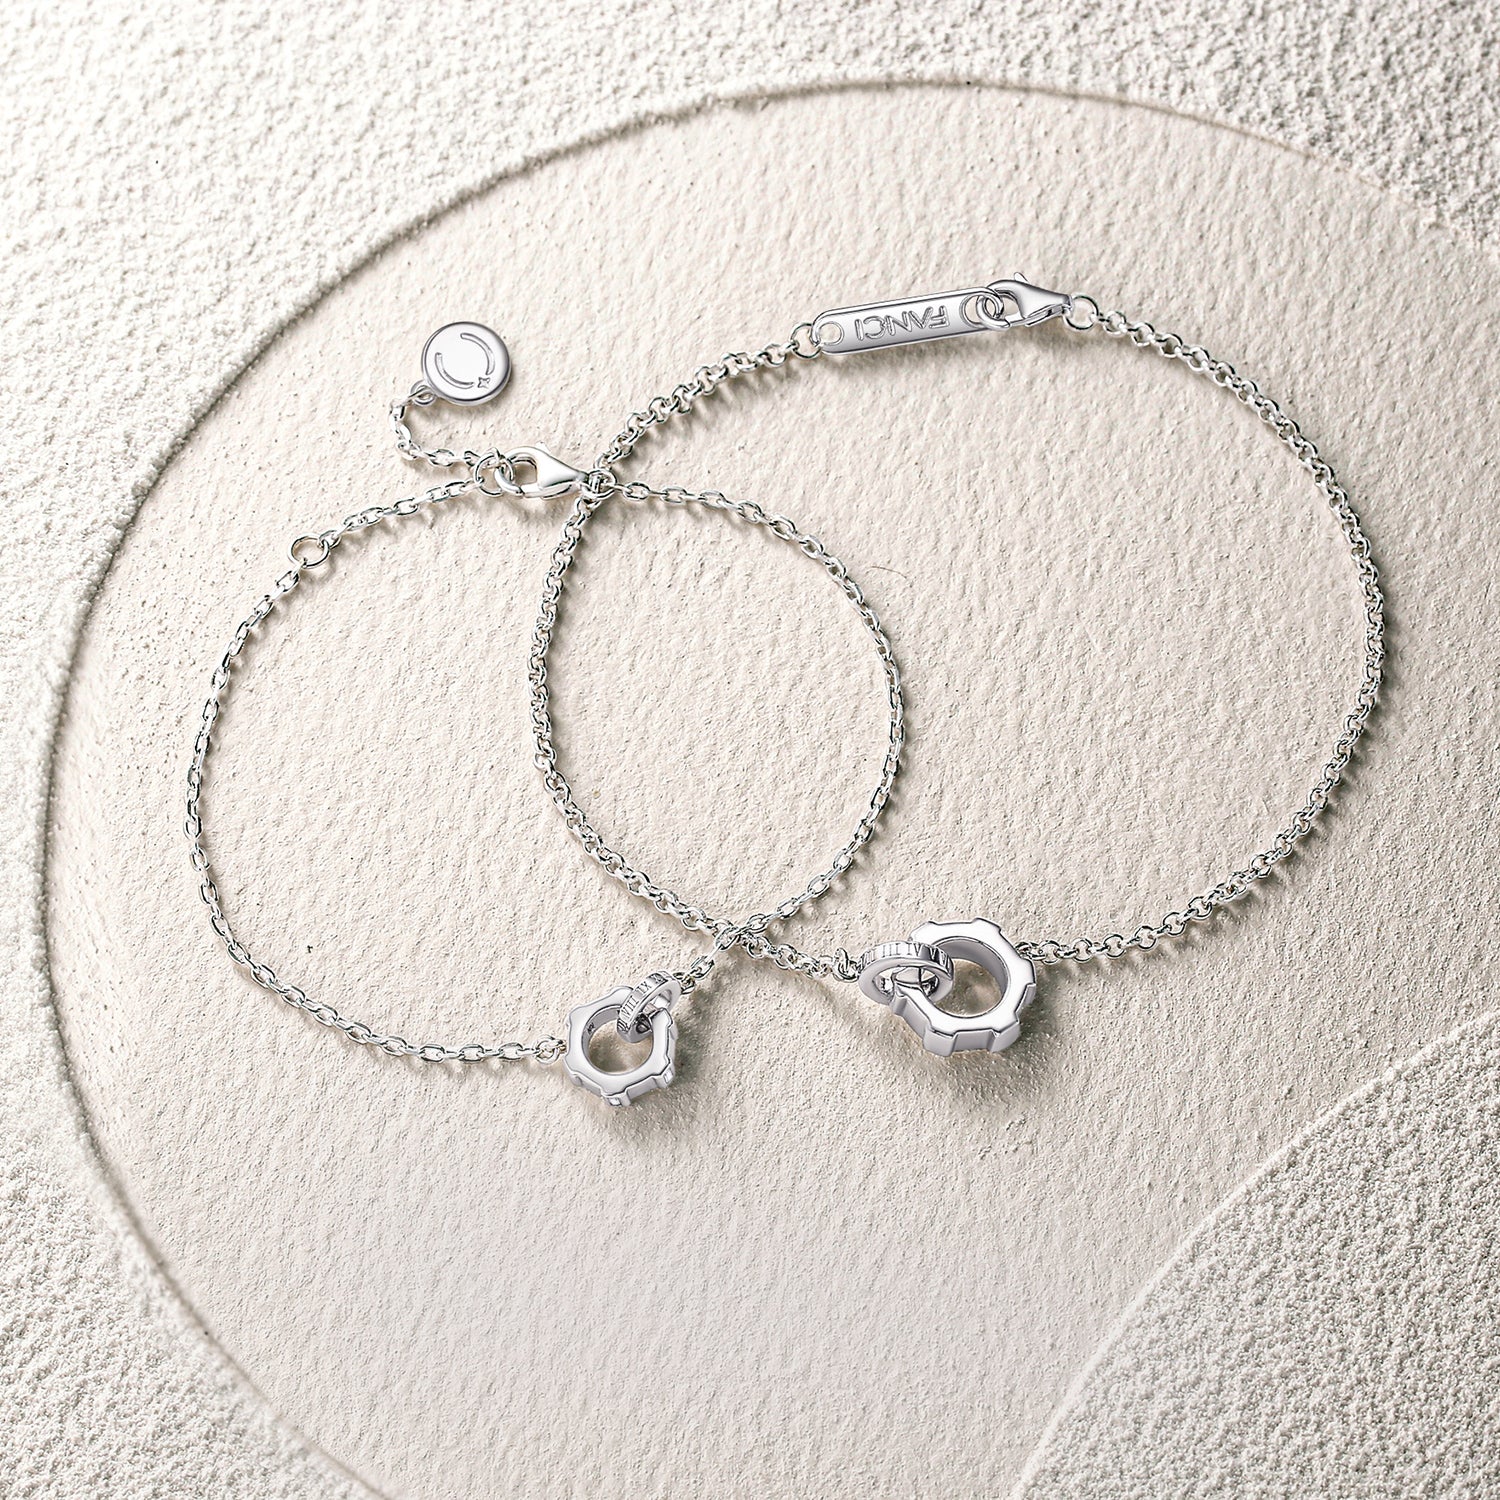 FANCIME "Infinite Time Lock" Couples Promise Matching Sterling Silver Bracelet Show